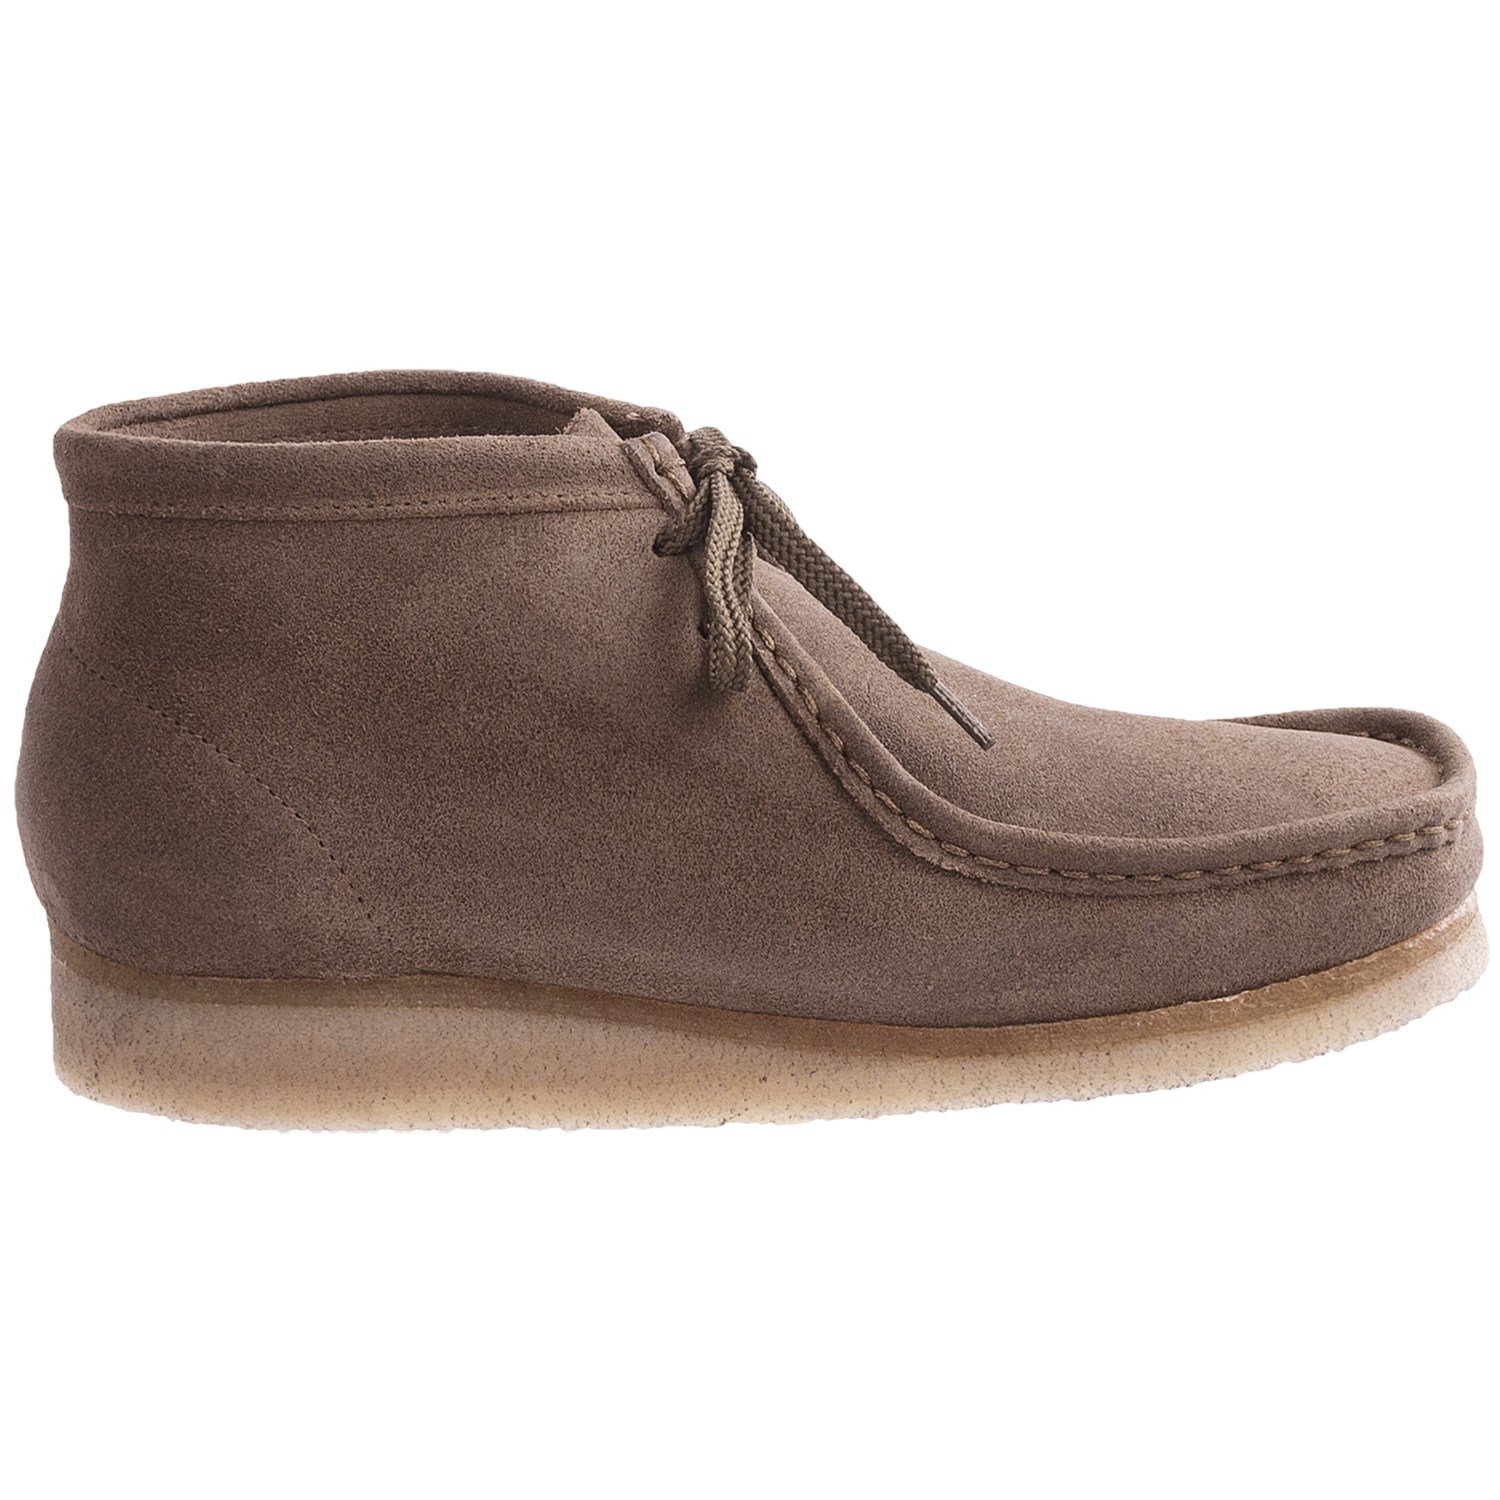 Clarks Wallabee Ankle Boots (For Men) 7058R - Save 67%